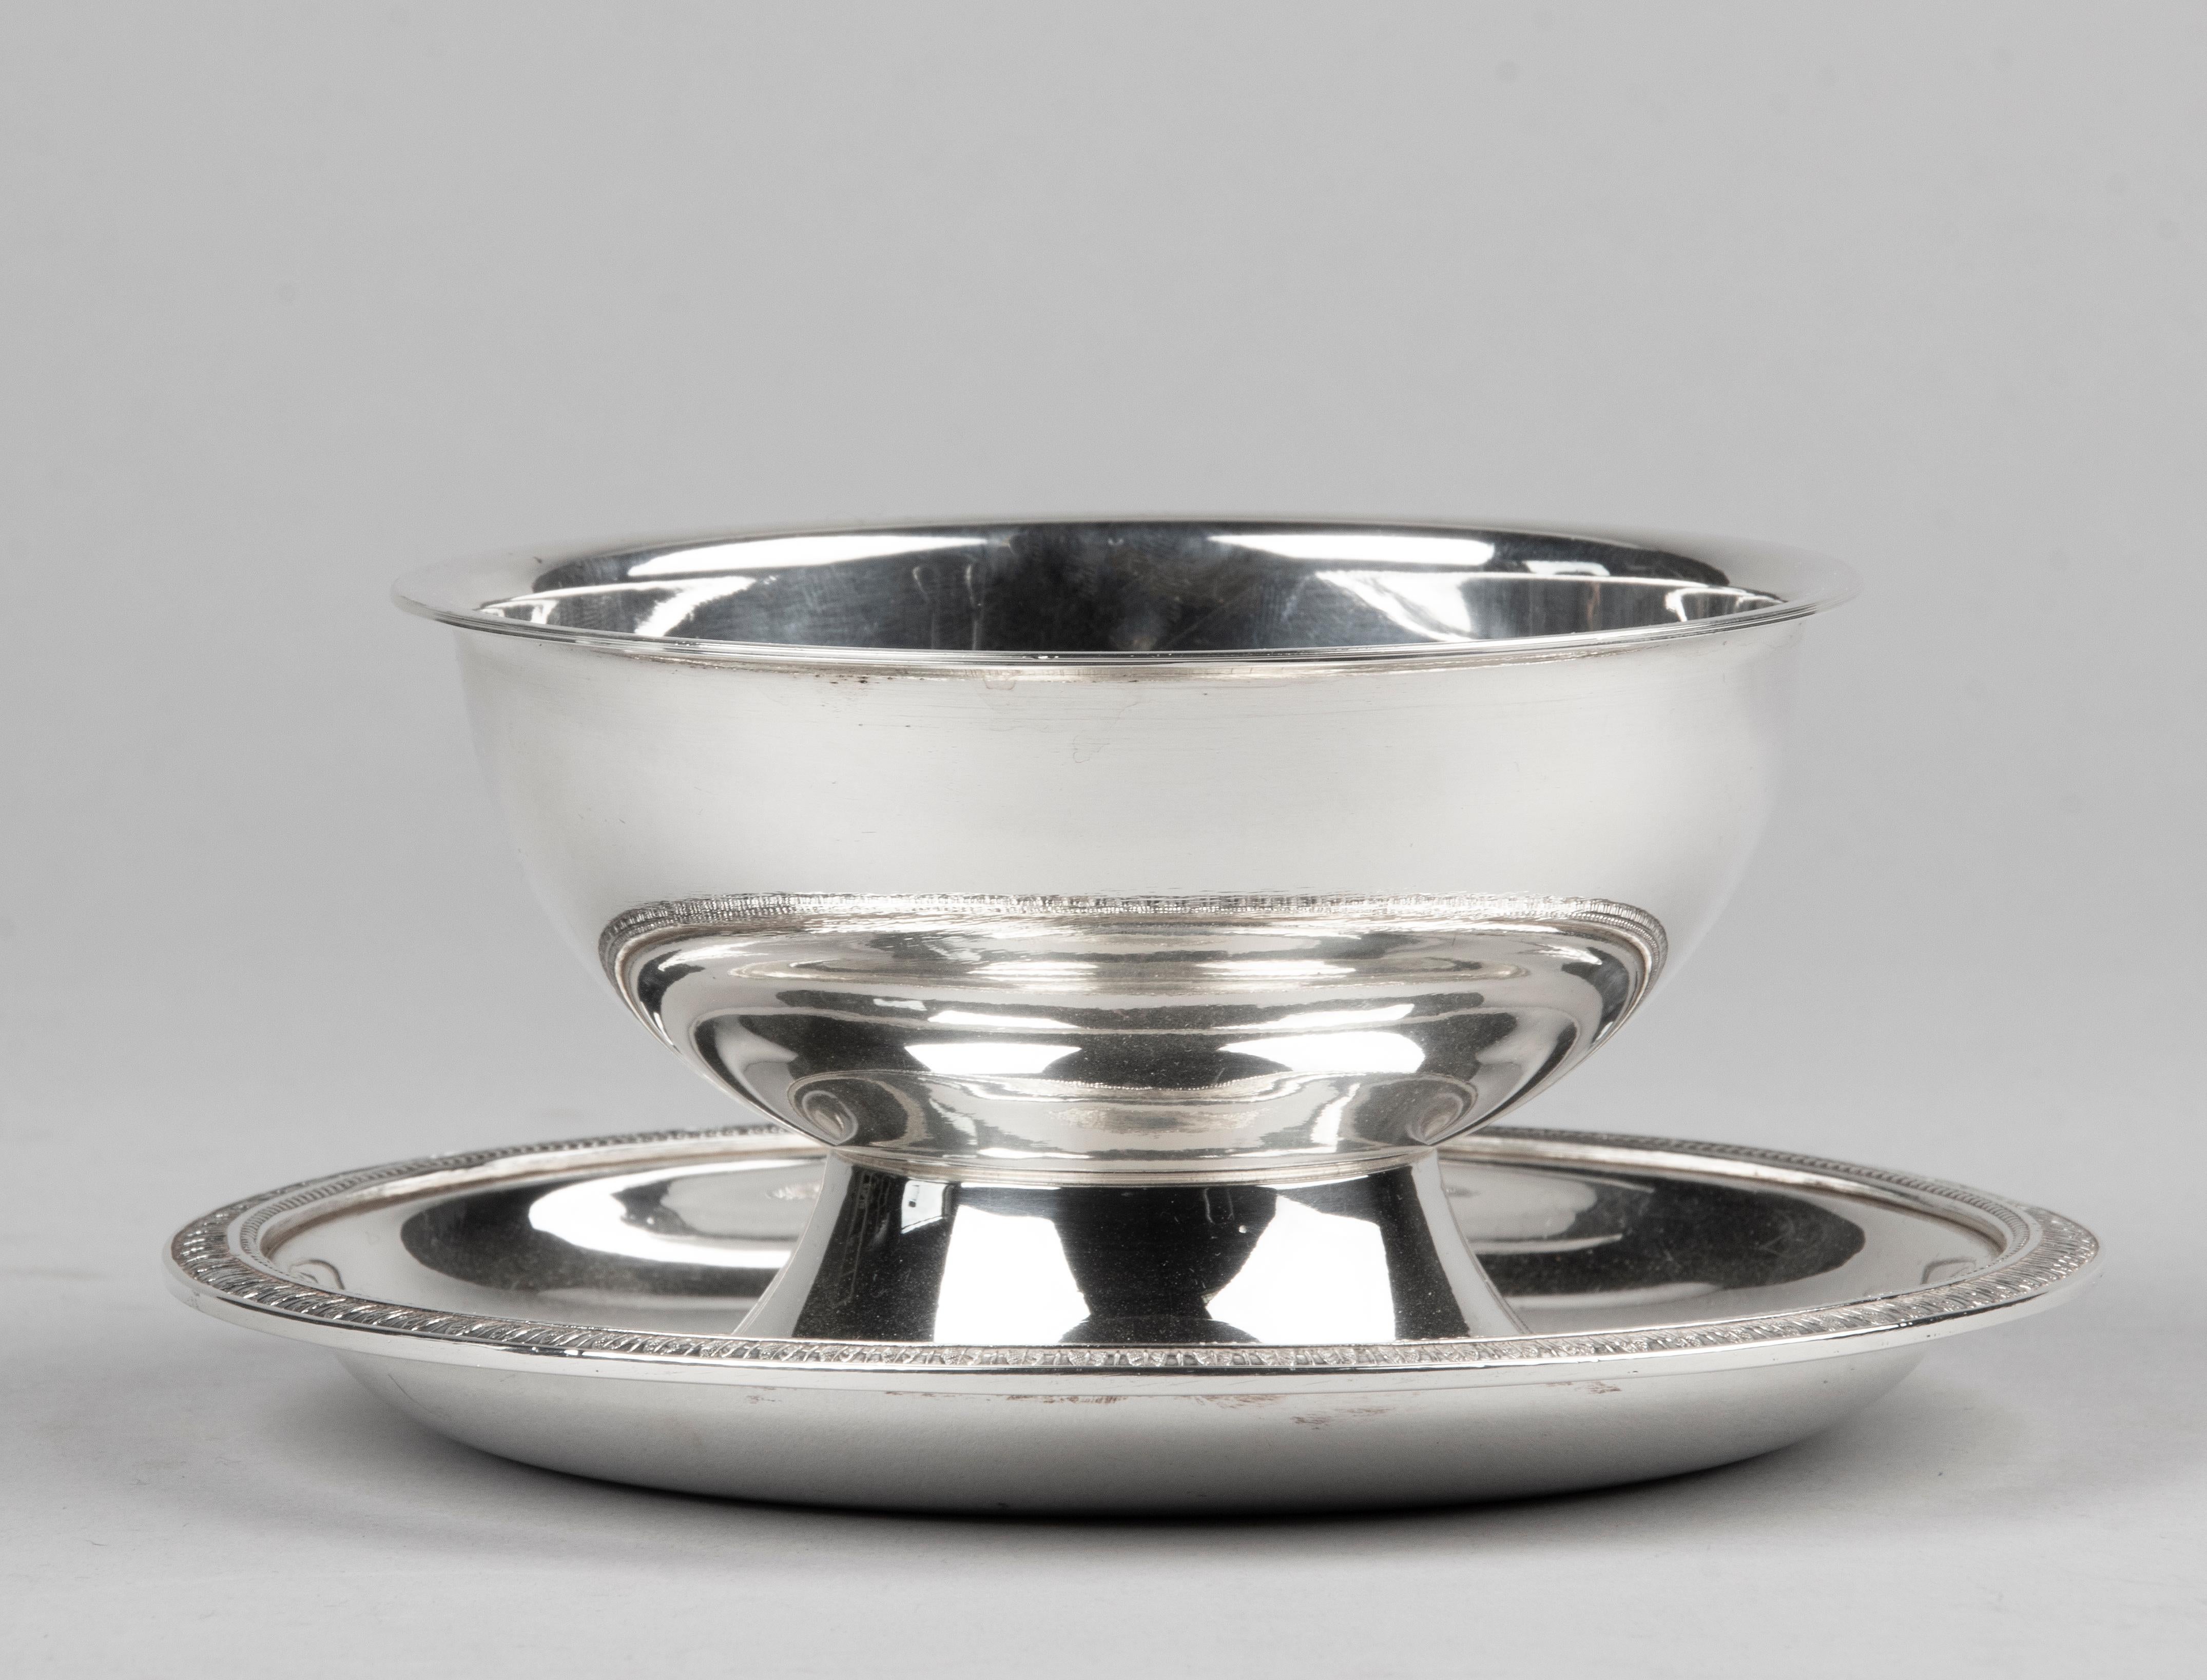 Beautiful silver plated sauce bowl with fixed saucer by the French brand Christofle. This bowl is from the Malmaison series. The bowl looks like it has hardly been used, it is in top condition. Comes with an original Christofle fabric bag for